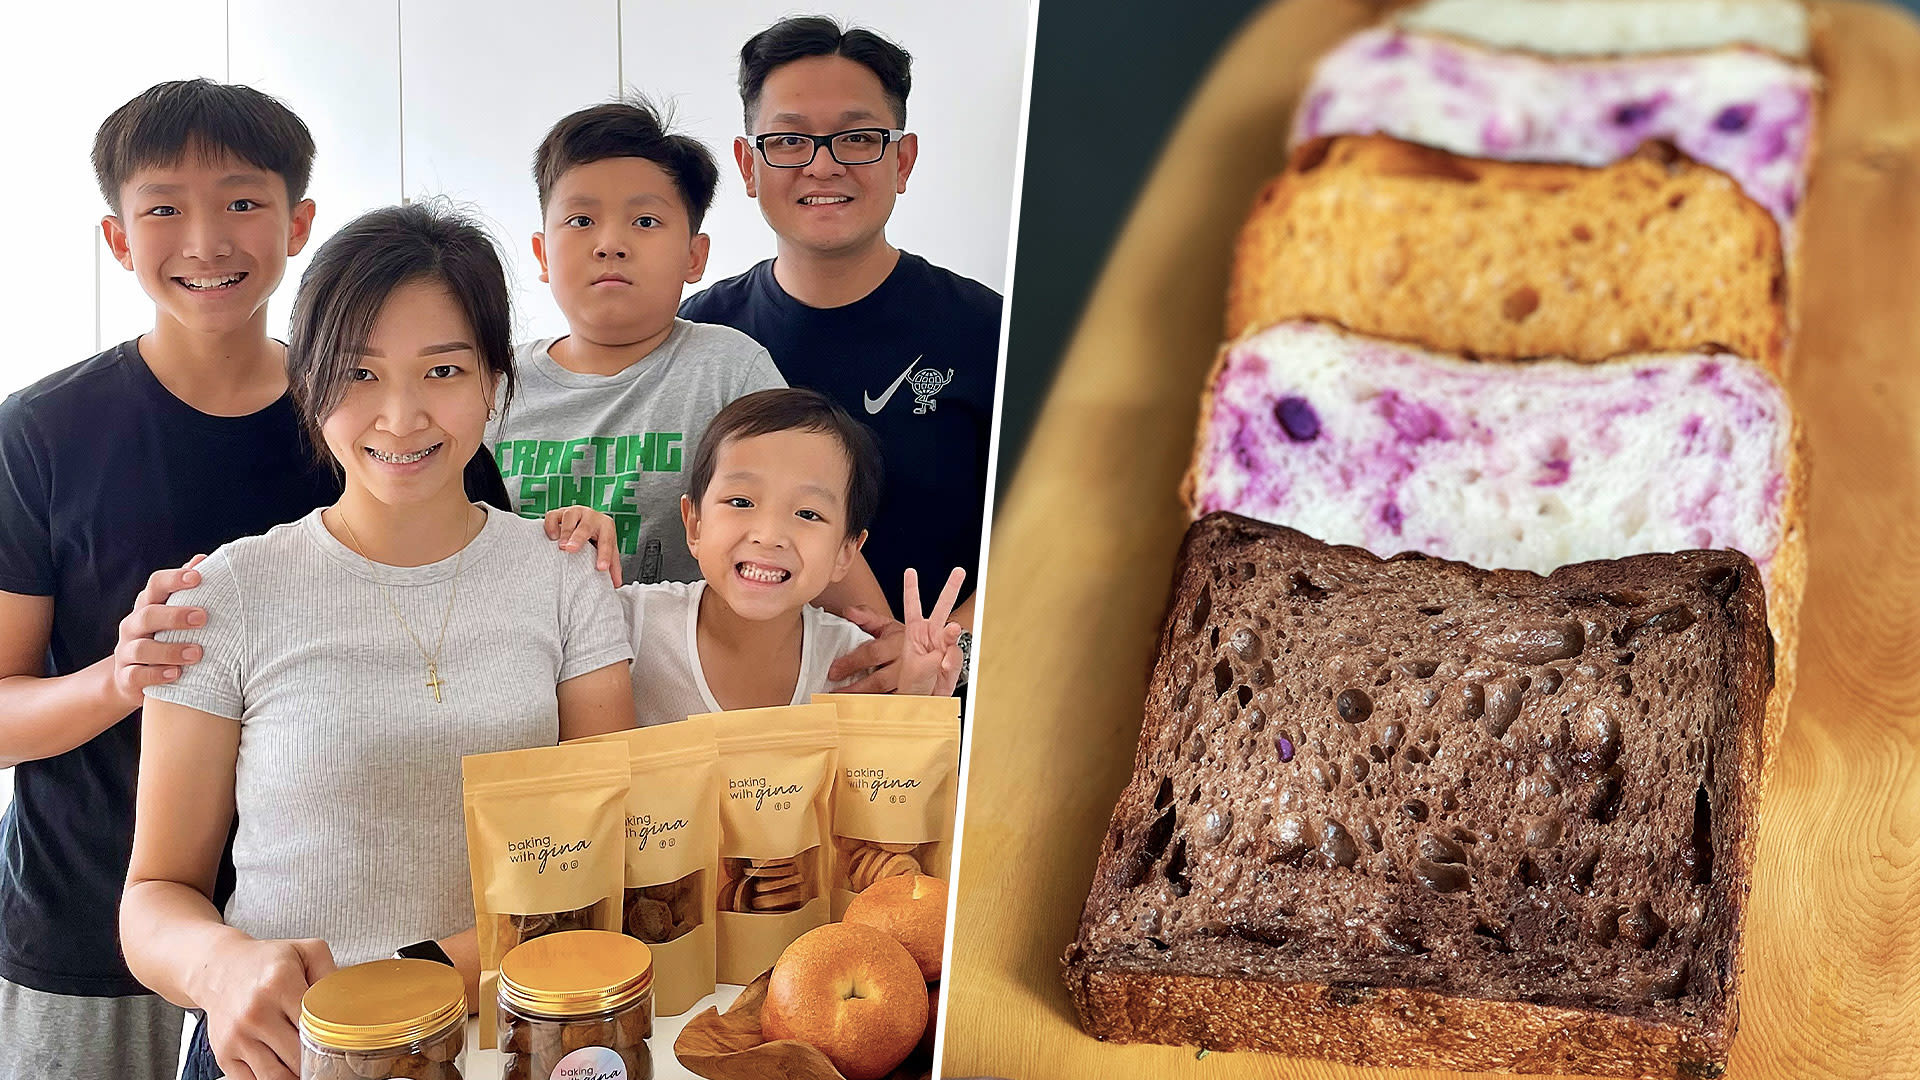 Colourful Sweet Potato, Chocolate Sourdough Bread Sold By Couple & 3 Kids From HDB Flat